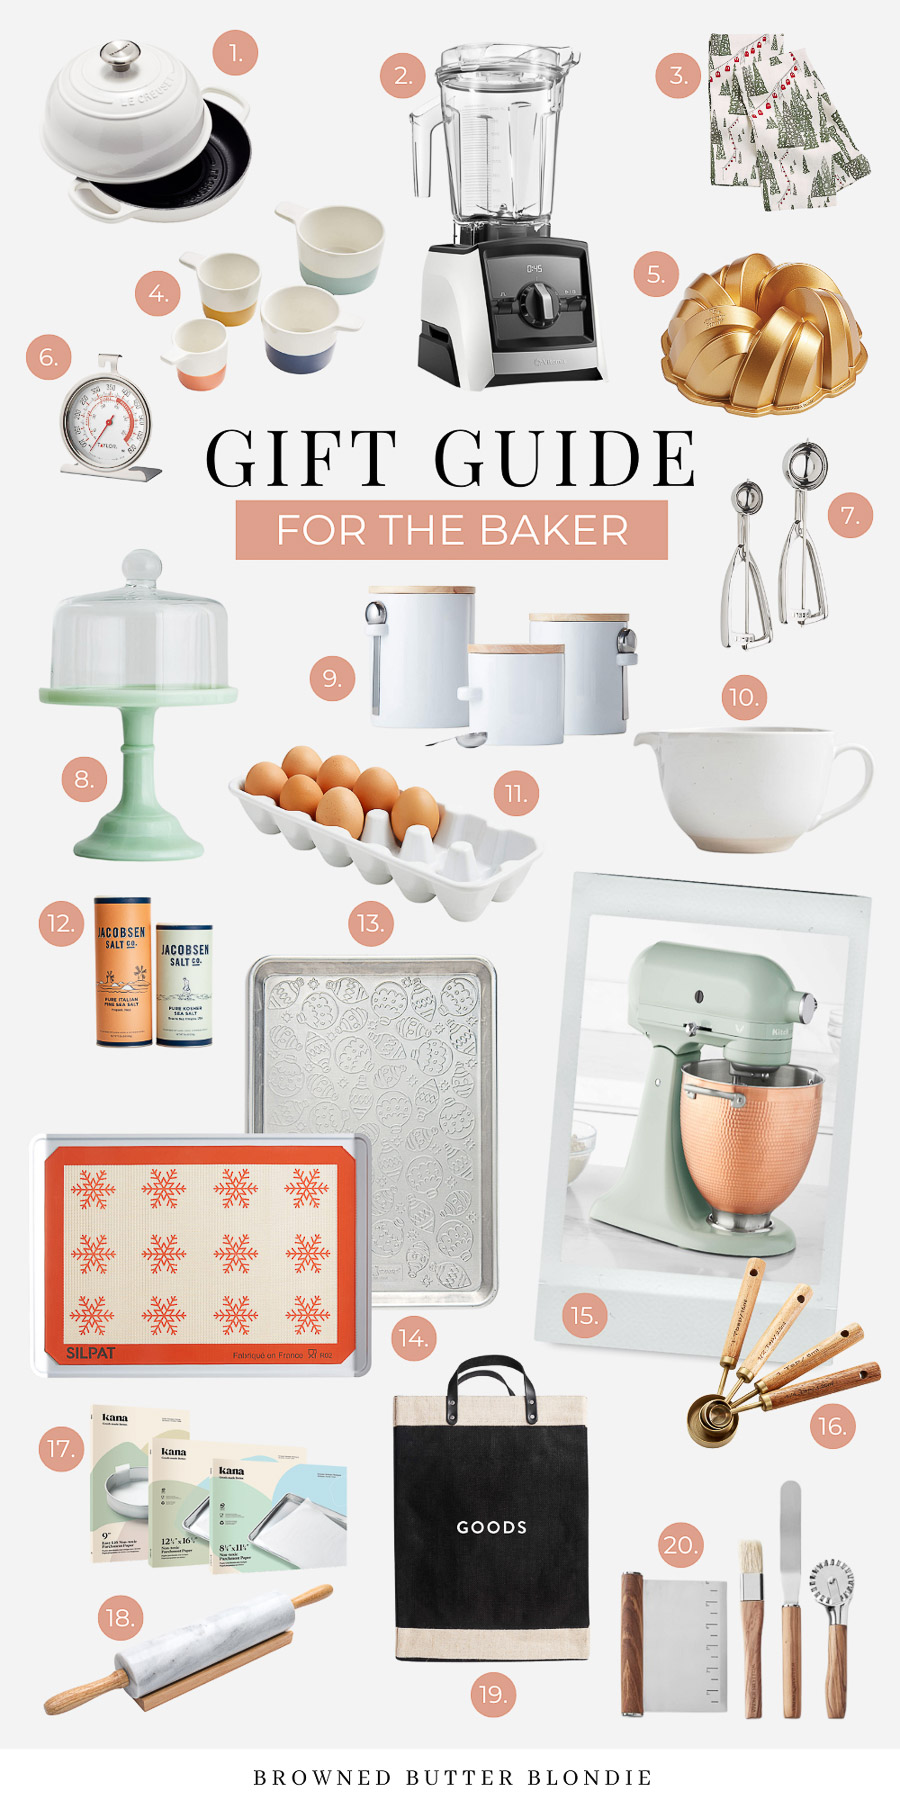 Holiday Gift Guide: Gifts for Her - Brown Eyed Baker